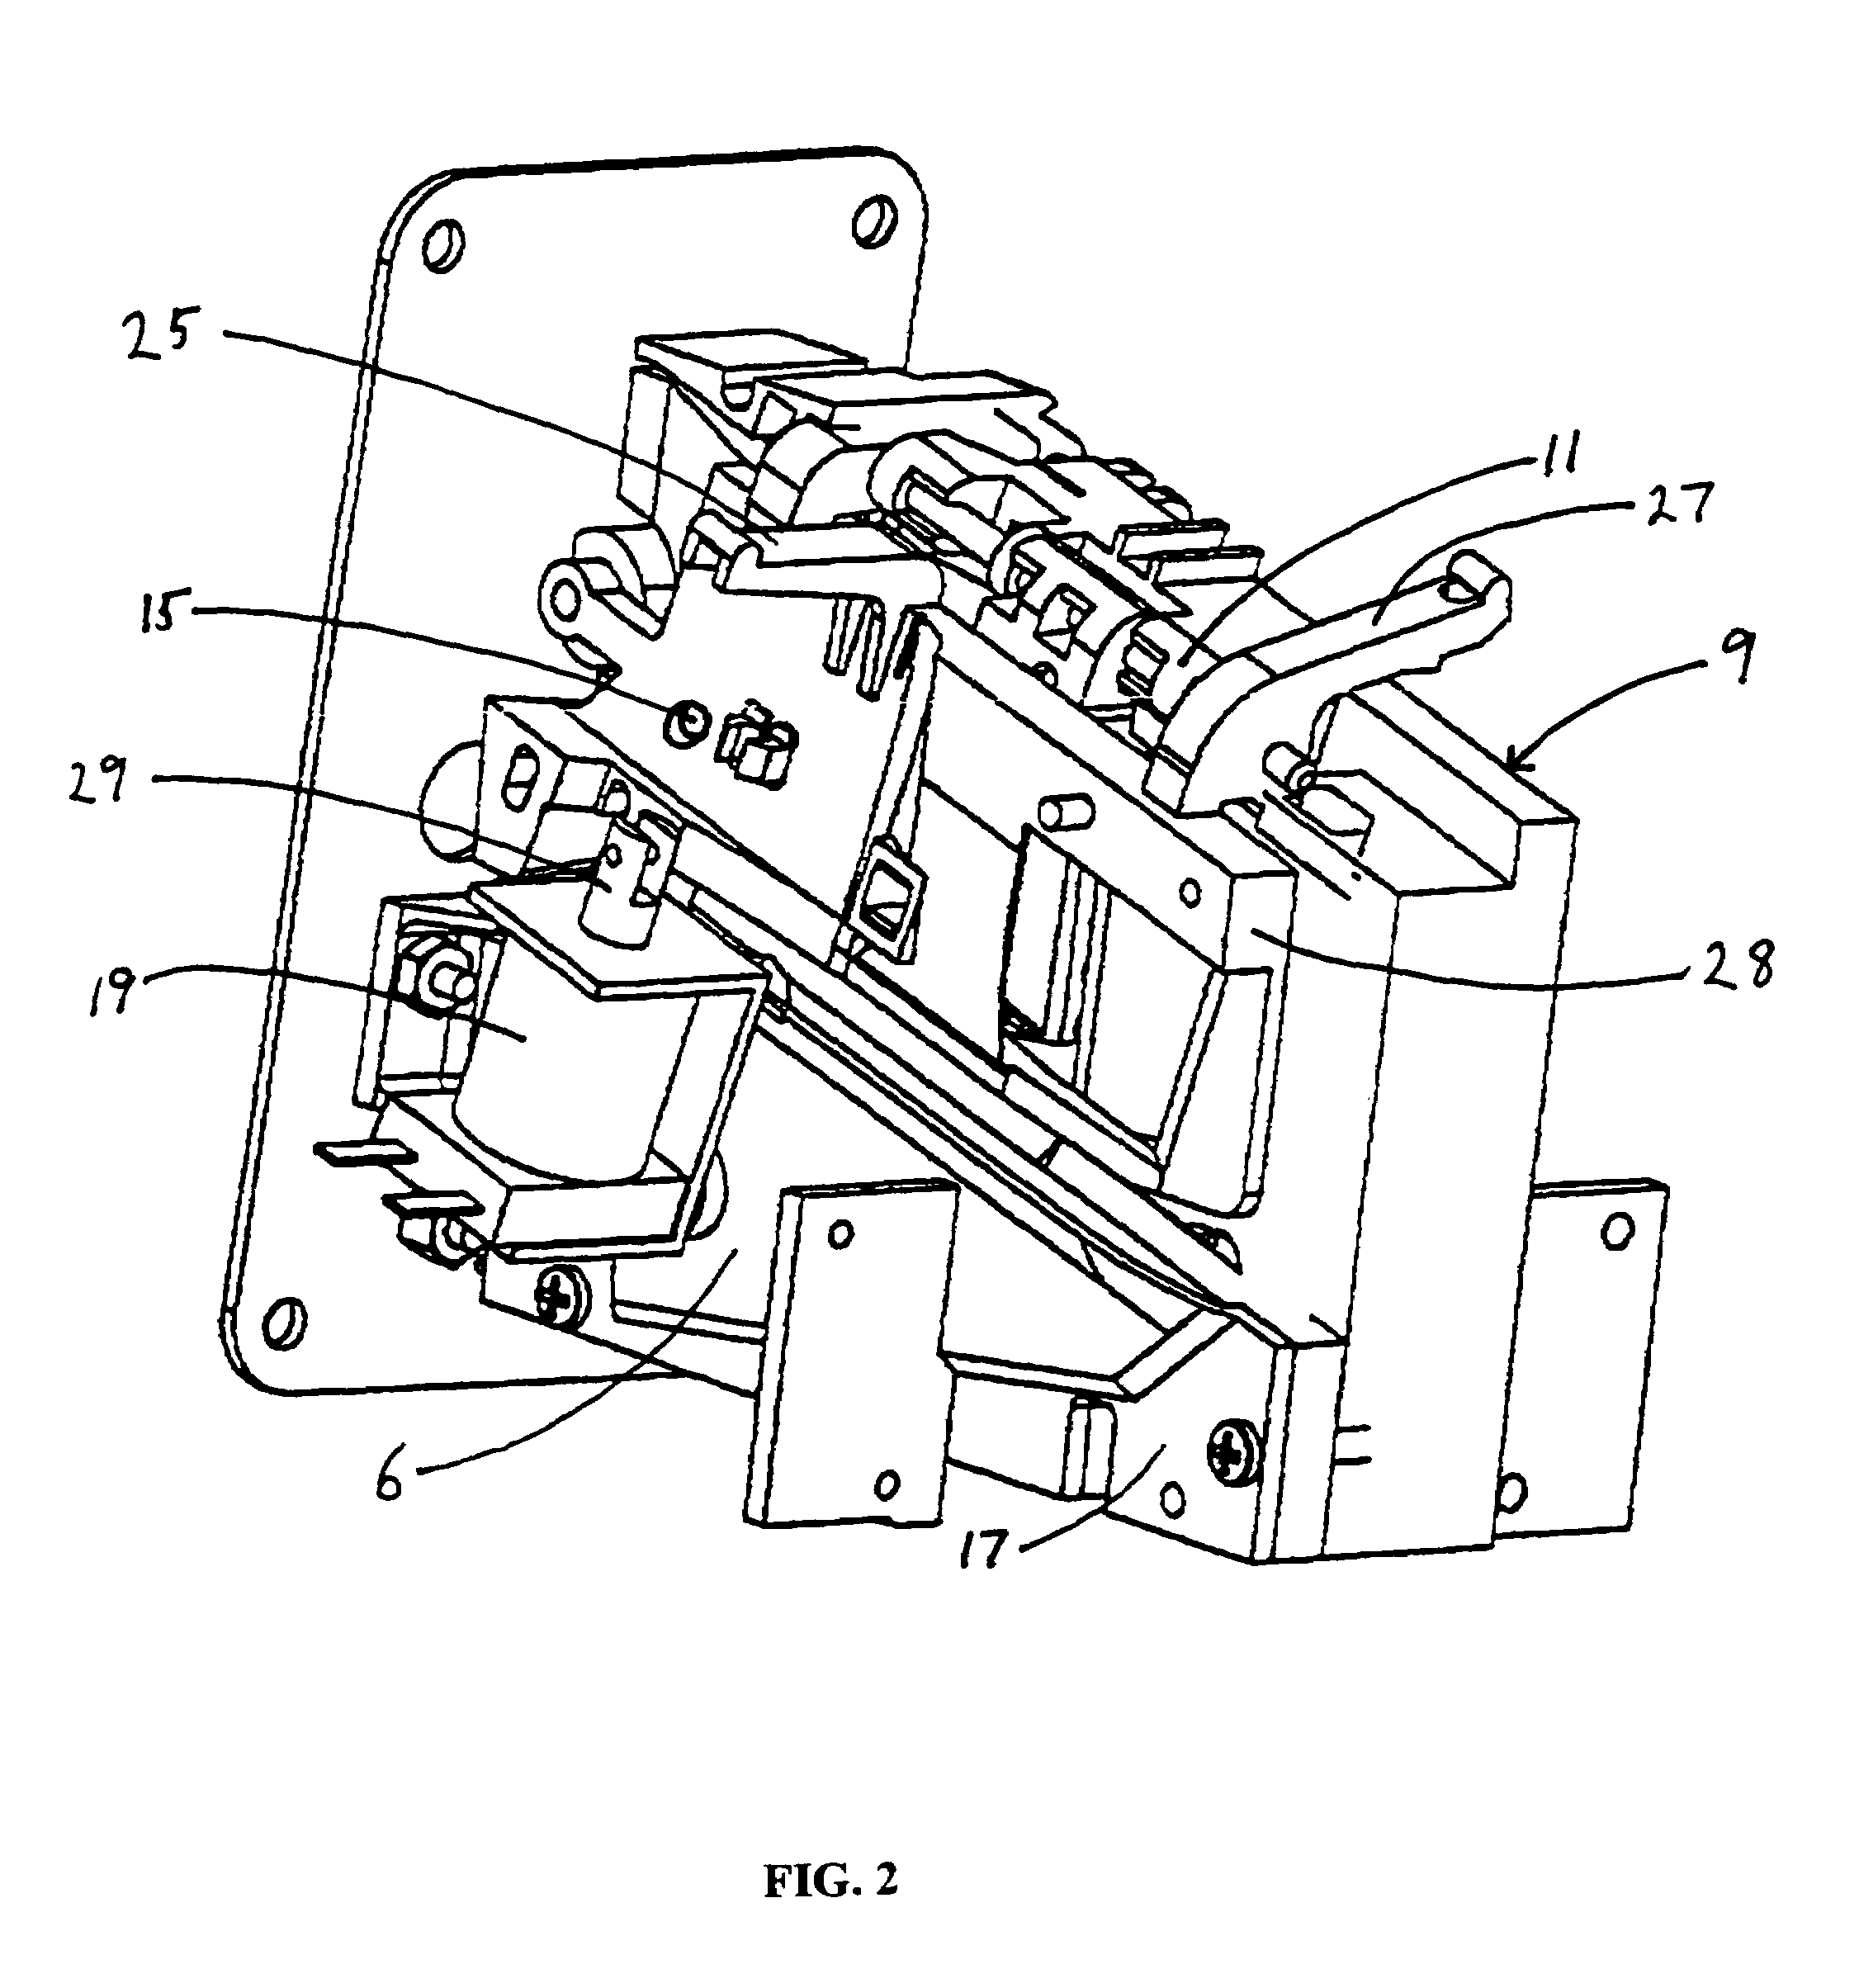 Apparatus and method for rejecting jammed coins